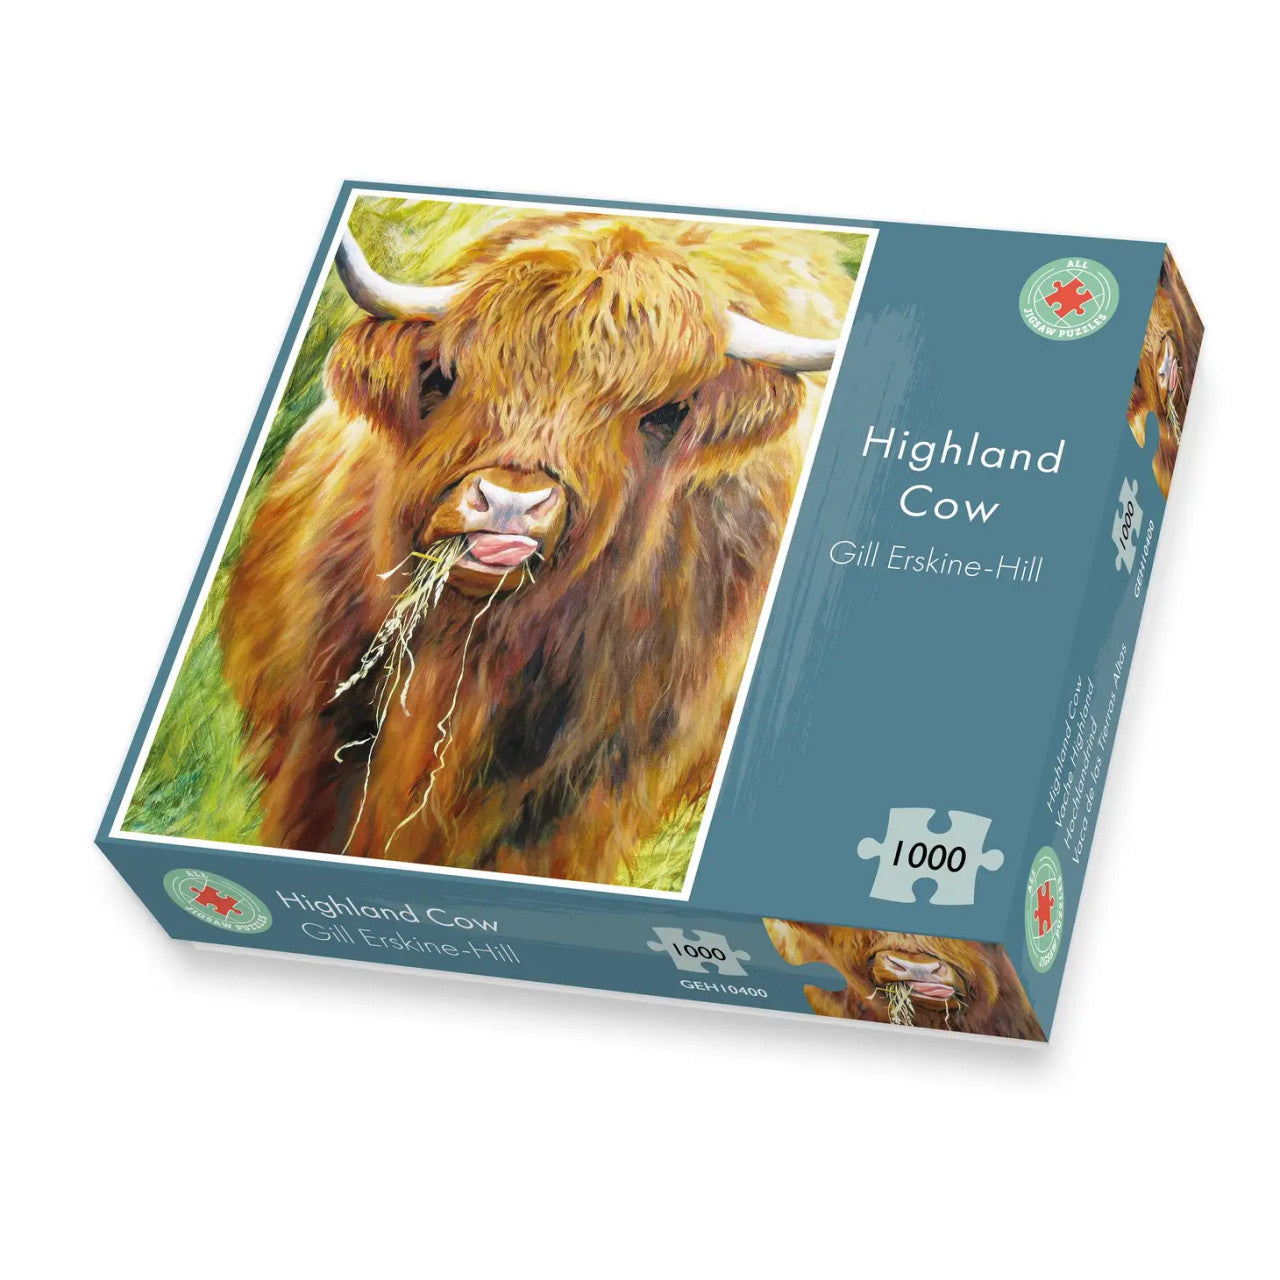 Highland Cow by Gill Erskine-Hill 1000 piece Jigsaw by All Jigsaw Puzzles.